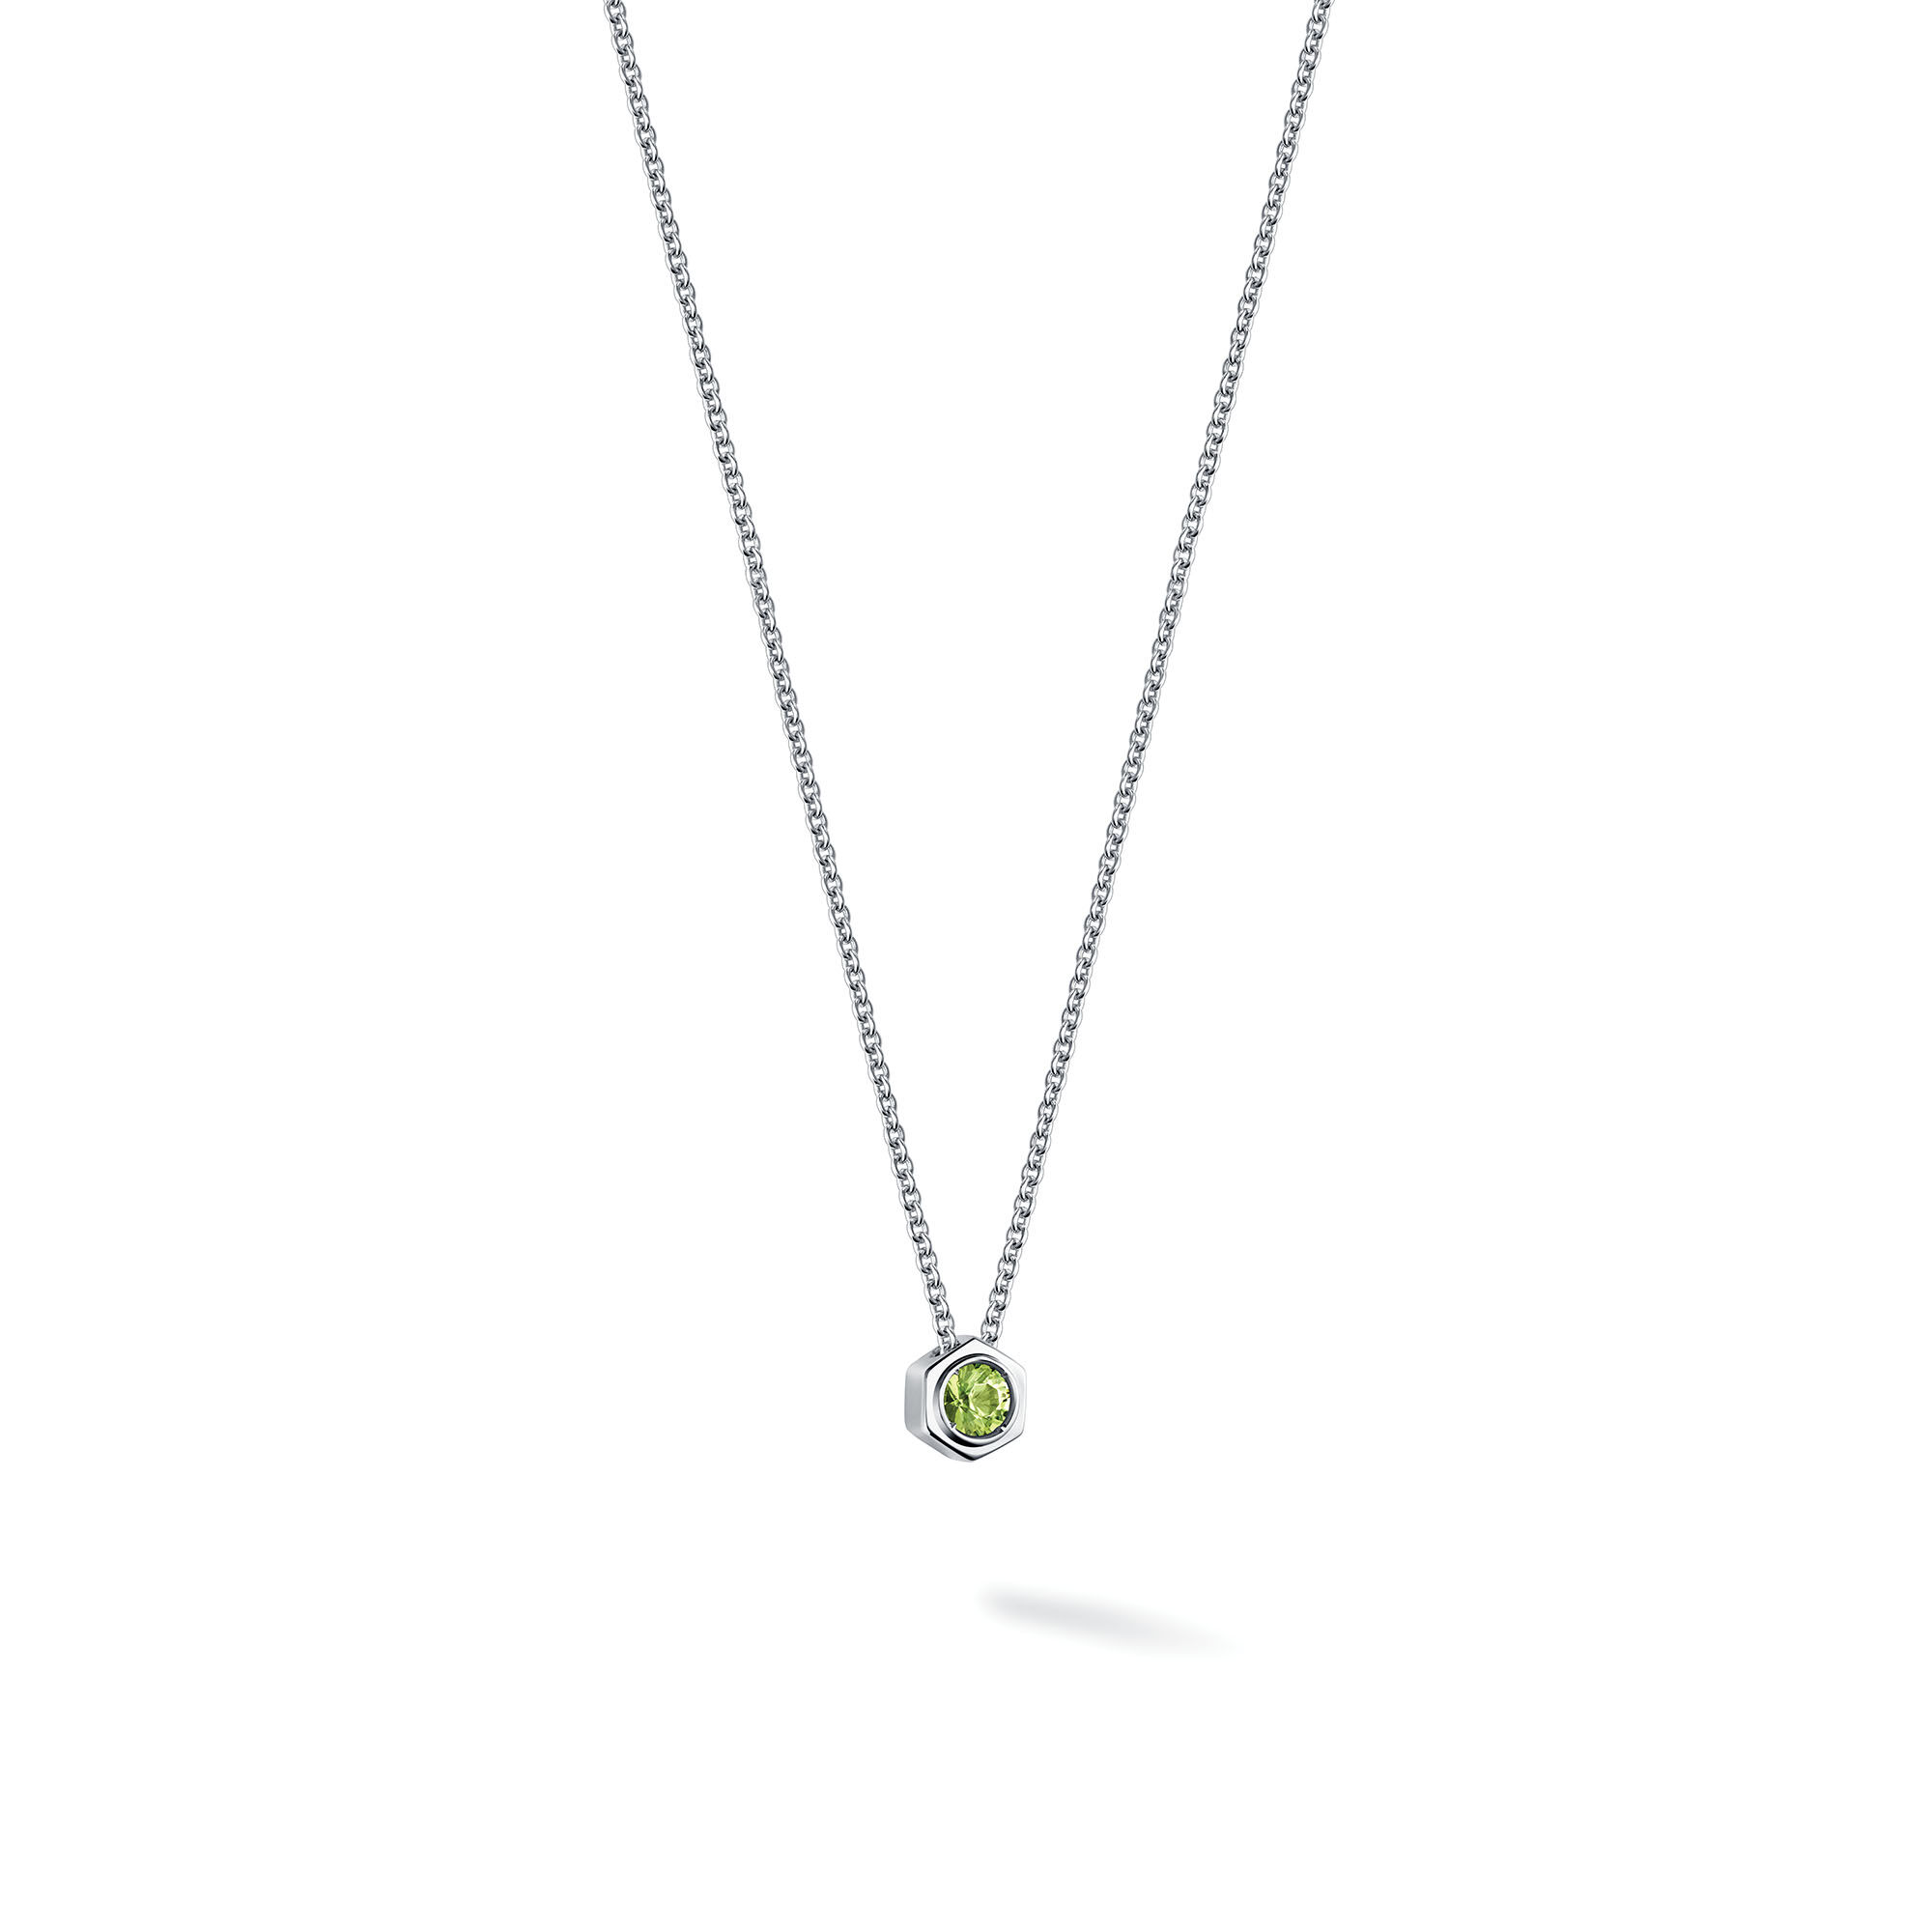 Peridot and Silver Necklace | Birks Bee Chic